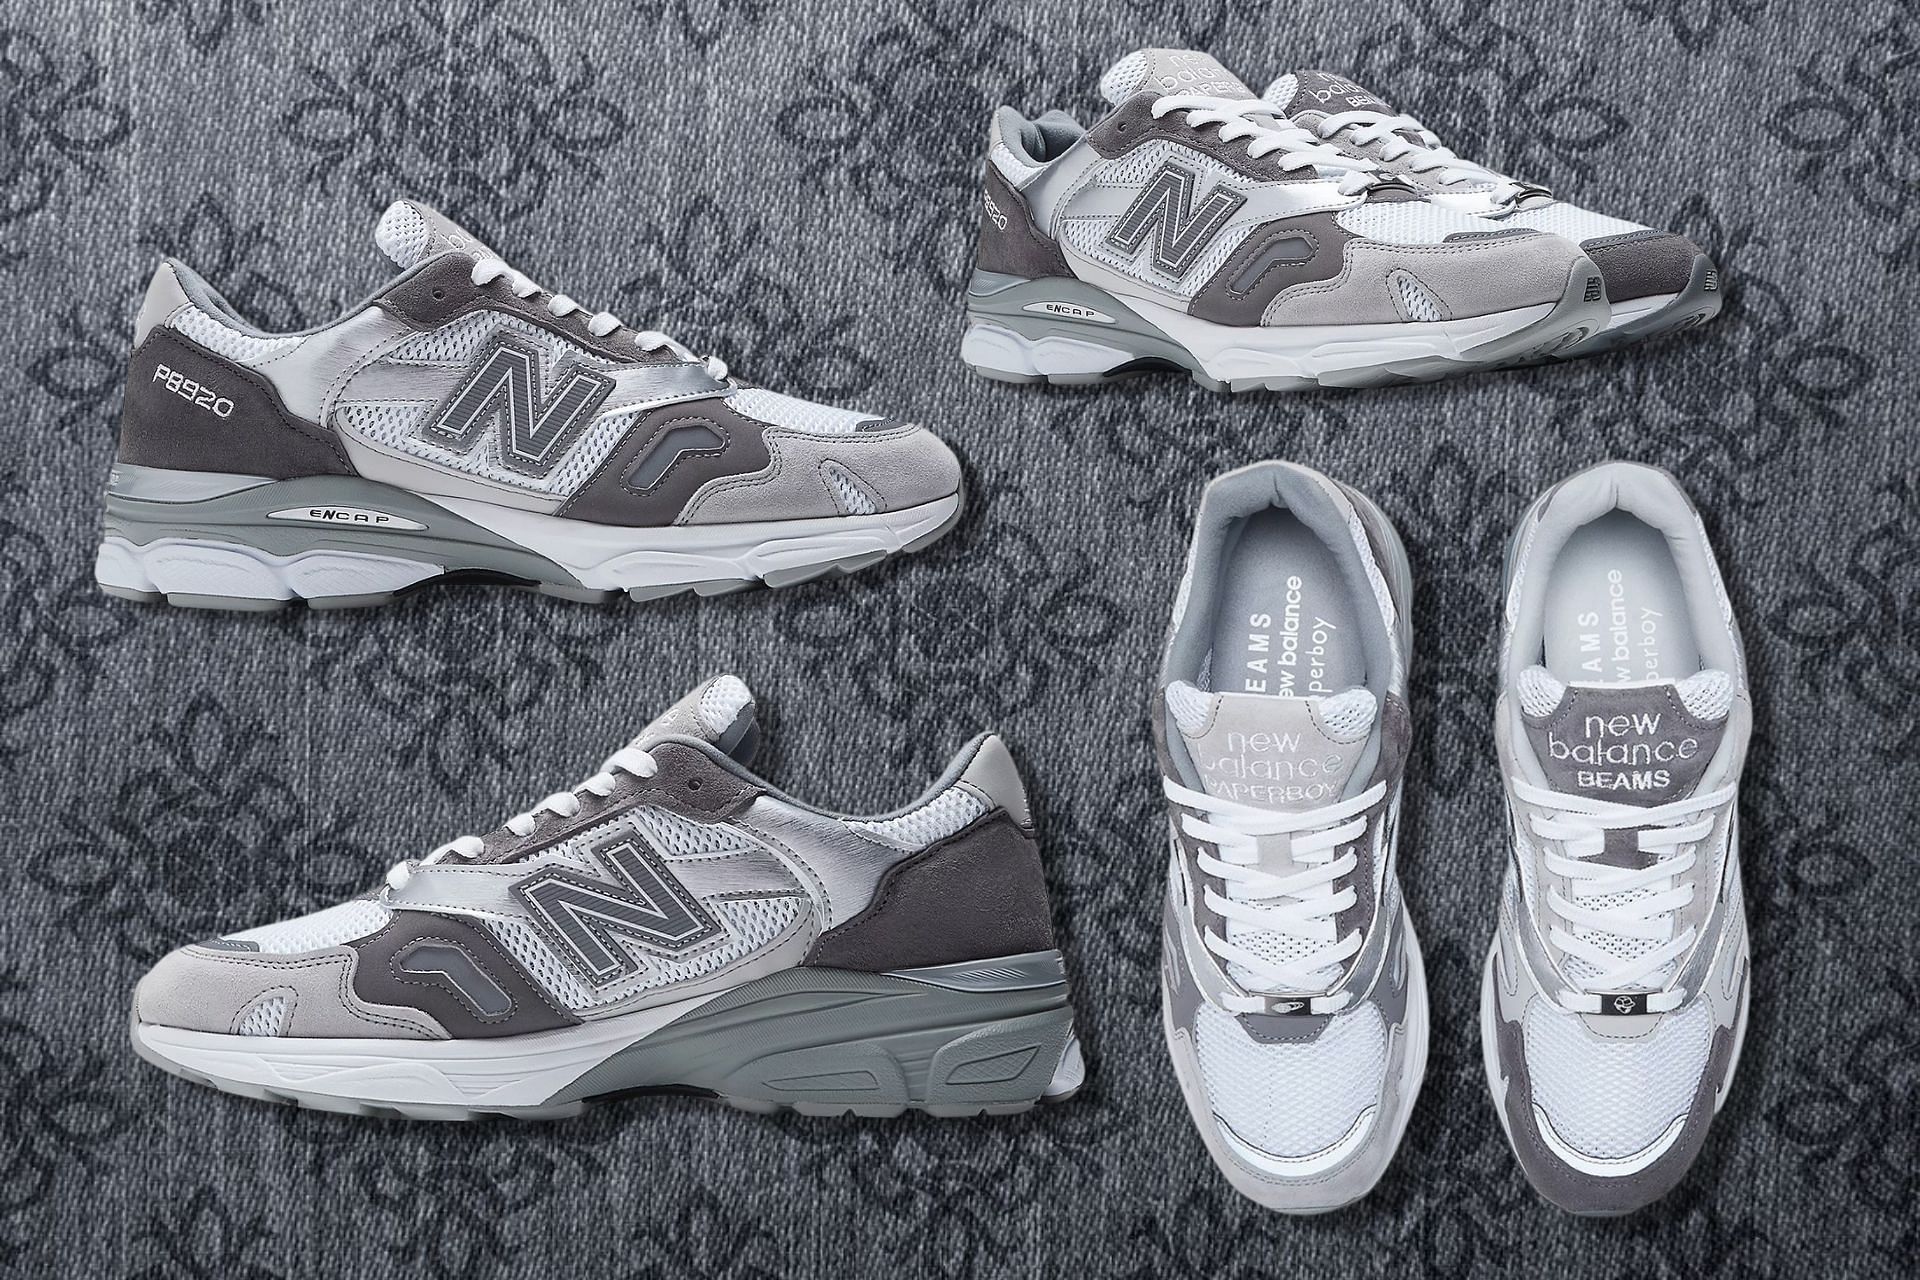 Where to buy PaperBoy Paris x Beams x New Balance sneaker collection ...